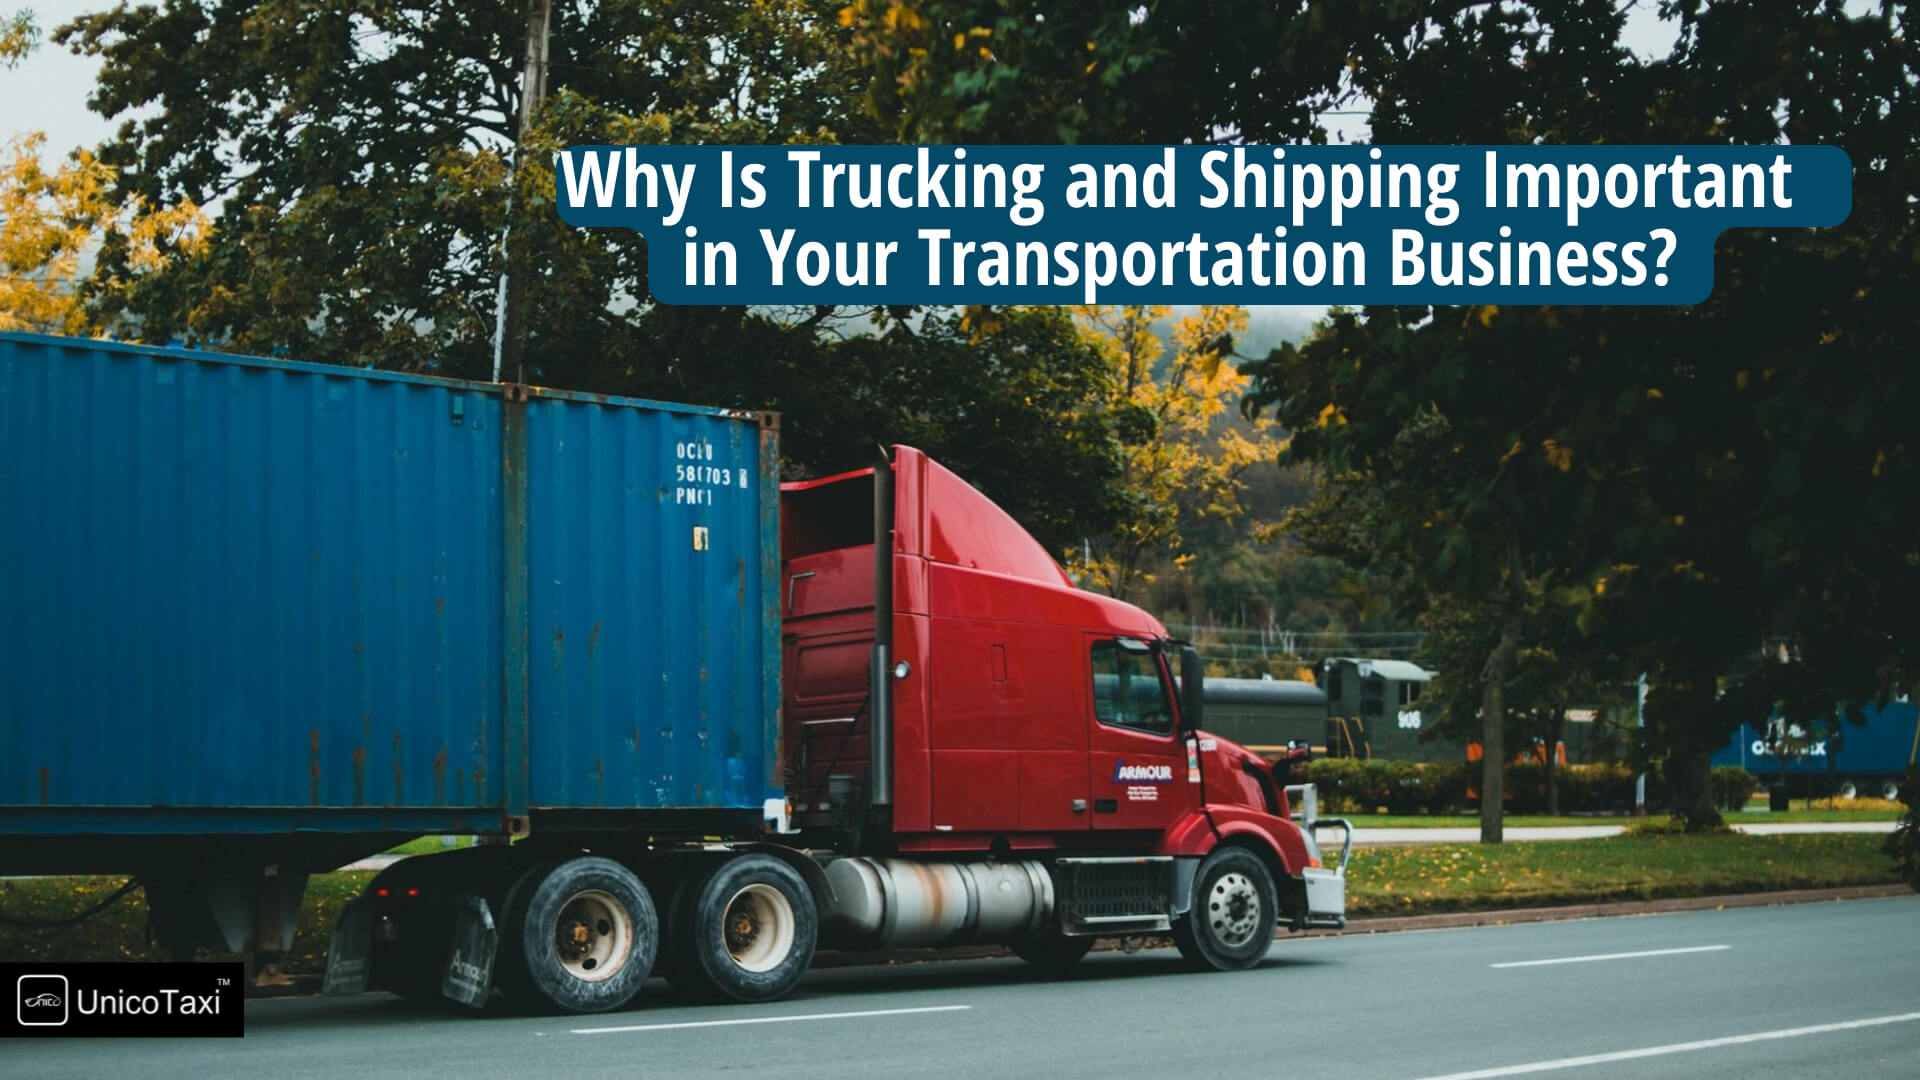 Why Is Trucking and Shipping Important in Your Transportation Business?